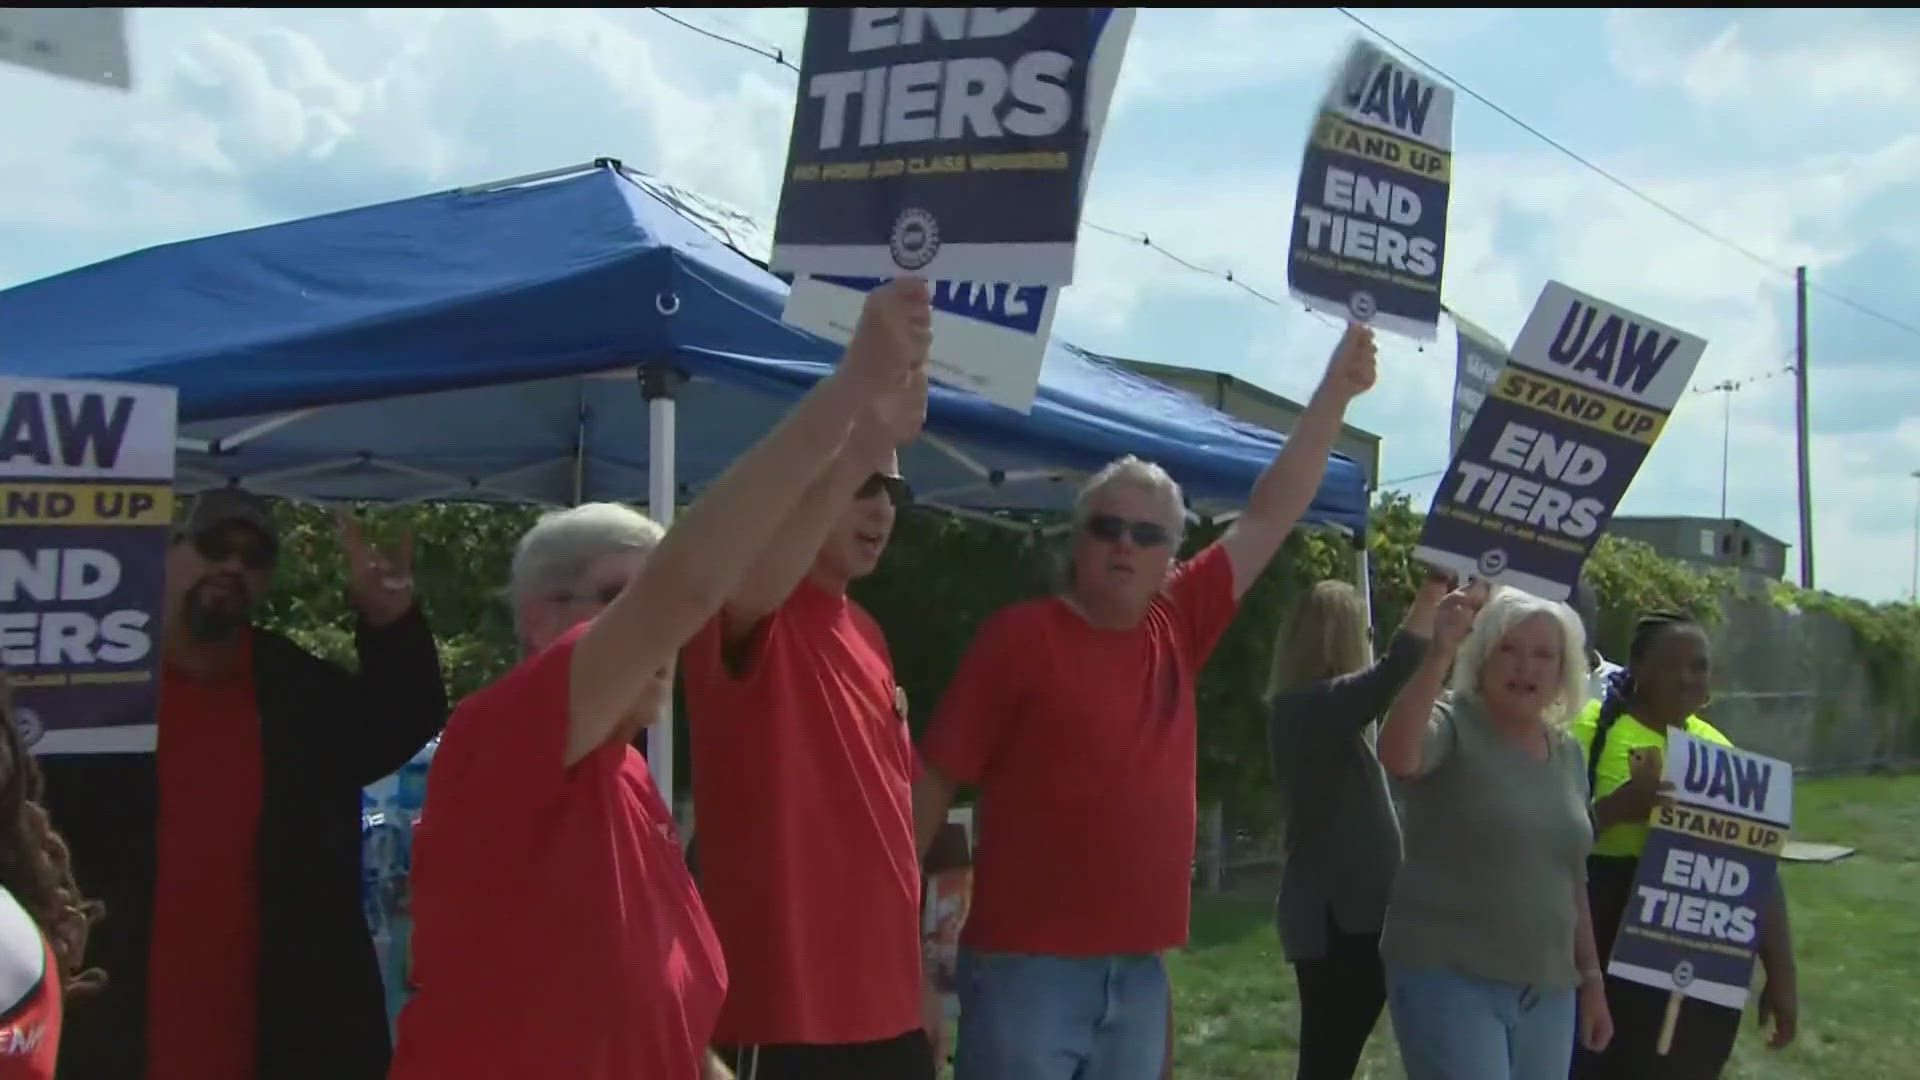 United Auto Workers leaders said that 2,000 workers in Kansas are ready to strike if a deal is not made.